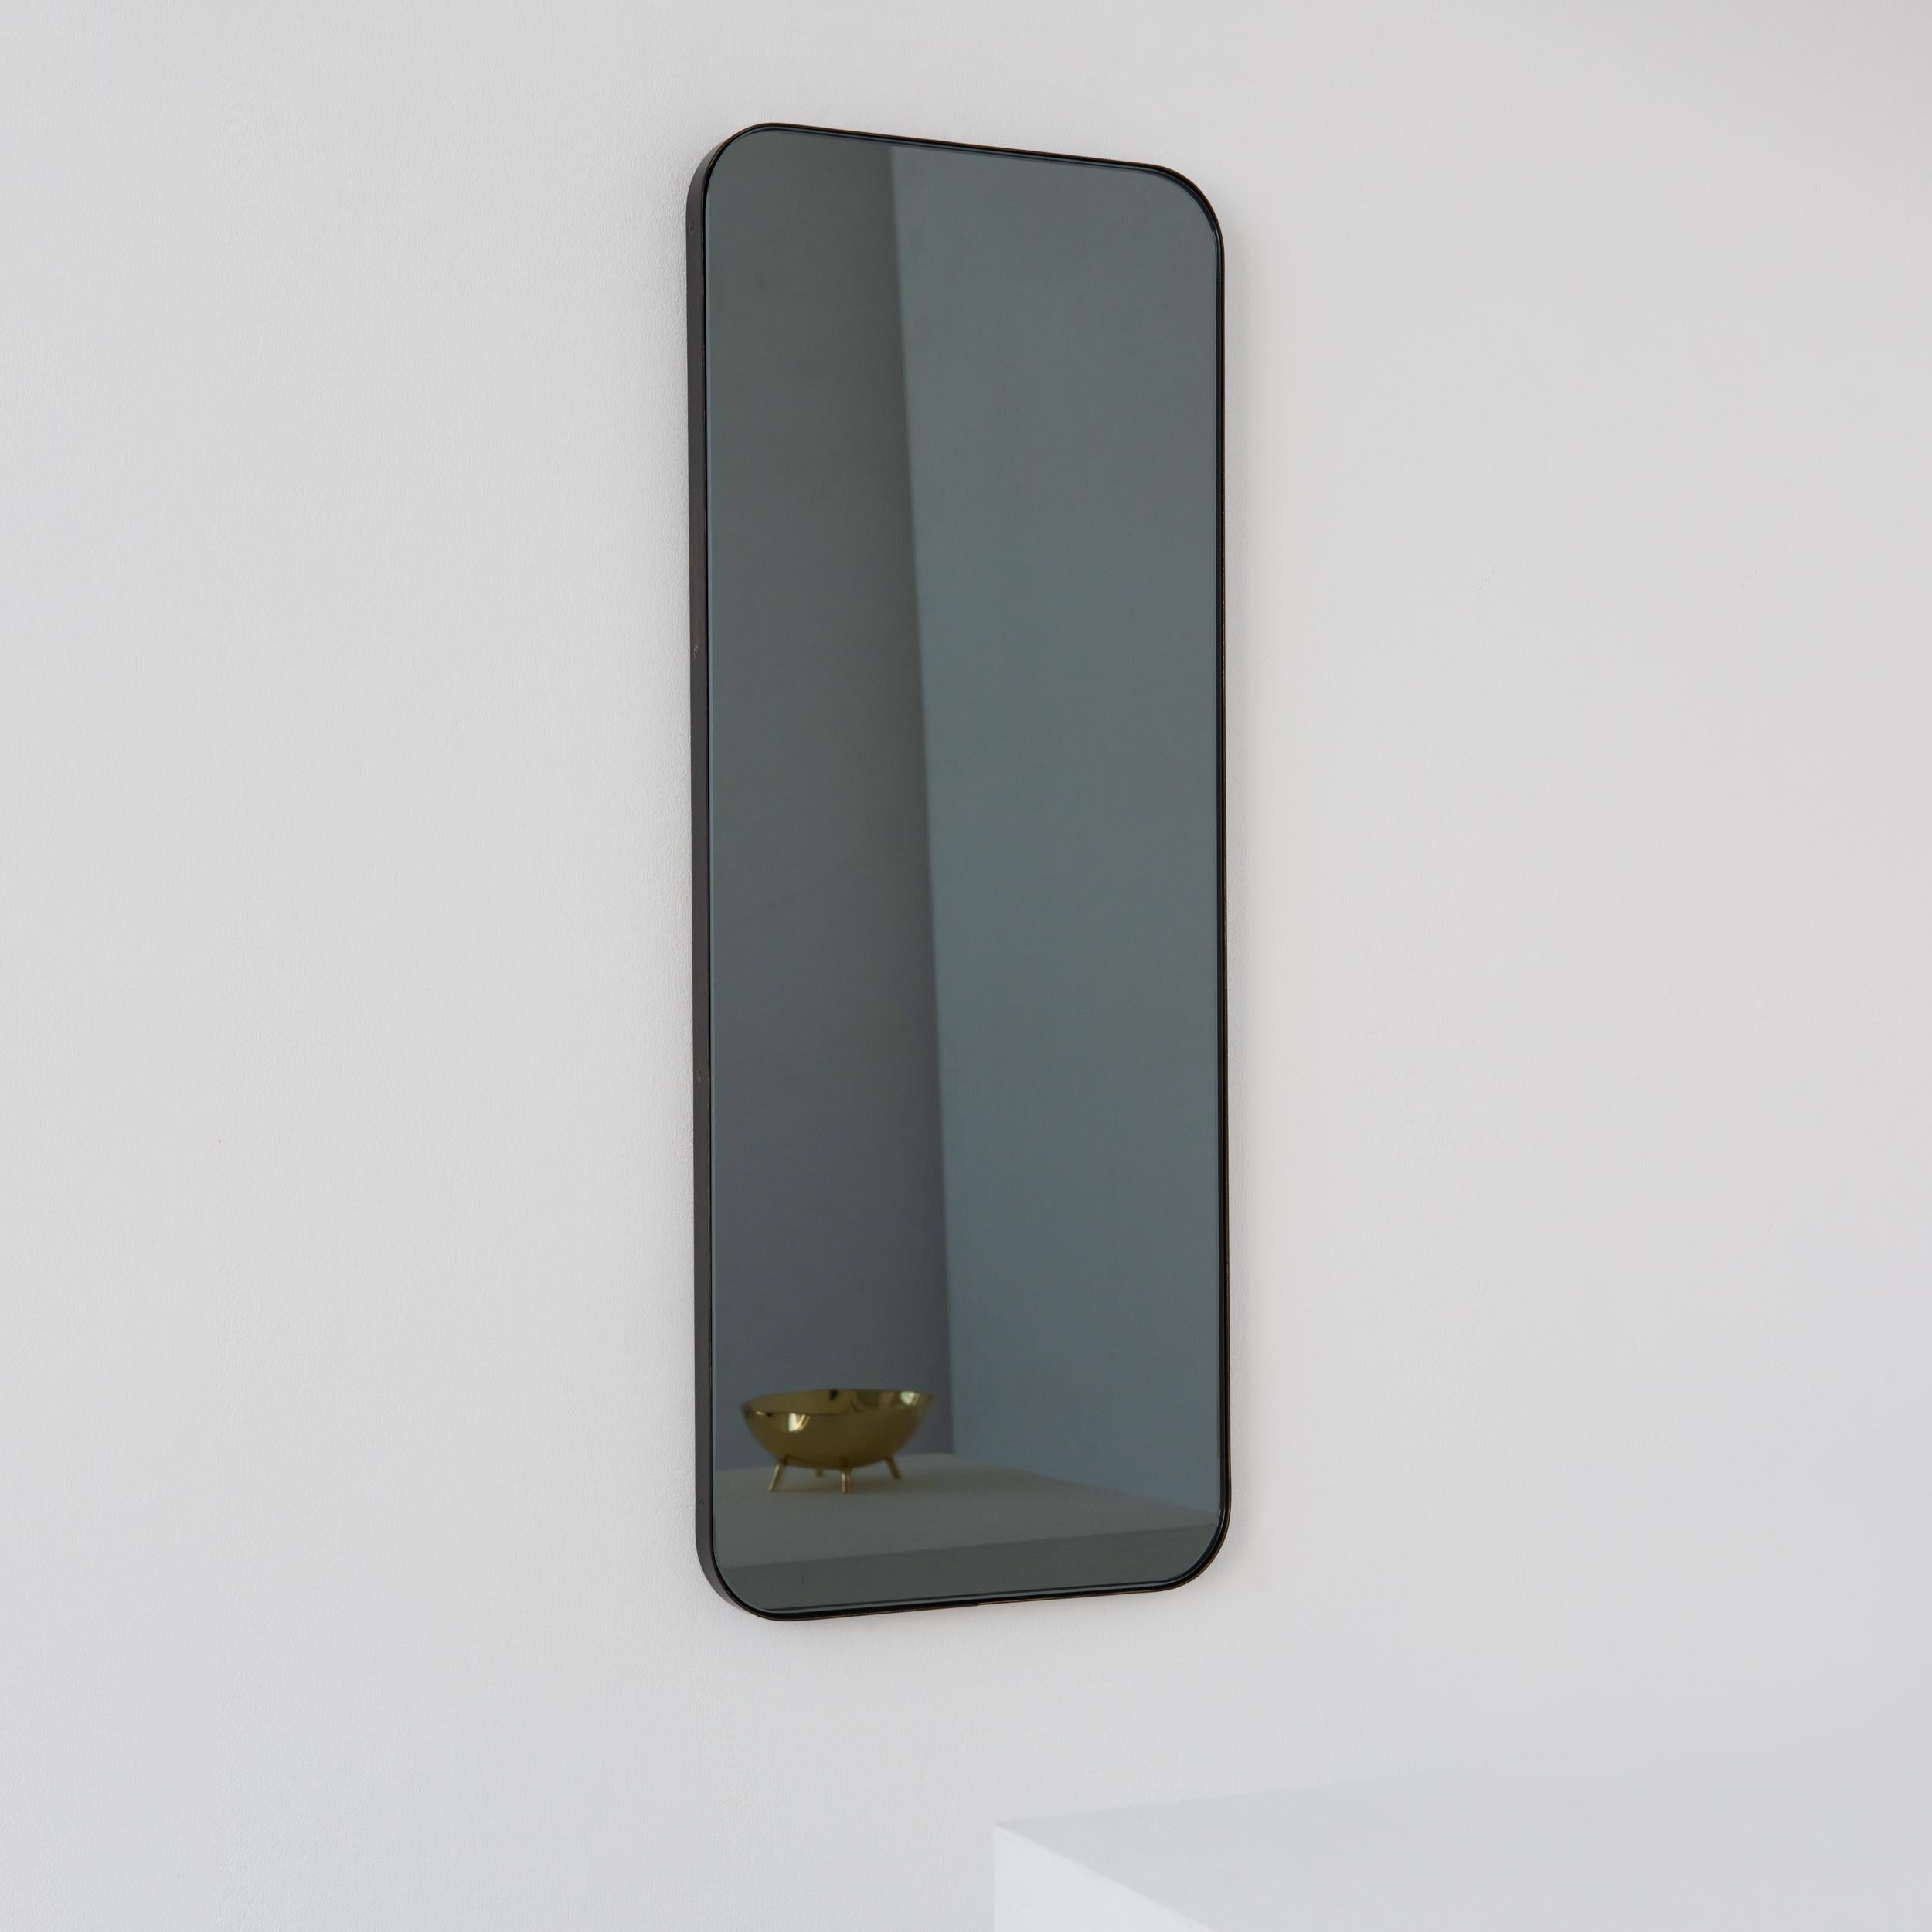 Quadris Black Tinted Rectangular Minimalist Mirror with a Black Frame, XL In New Condition For Sale In London, GB